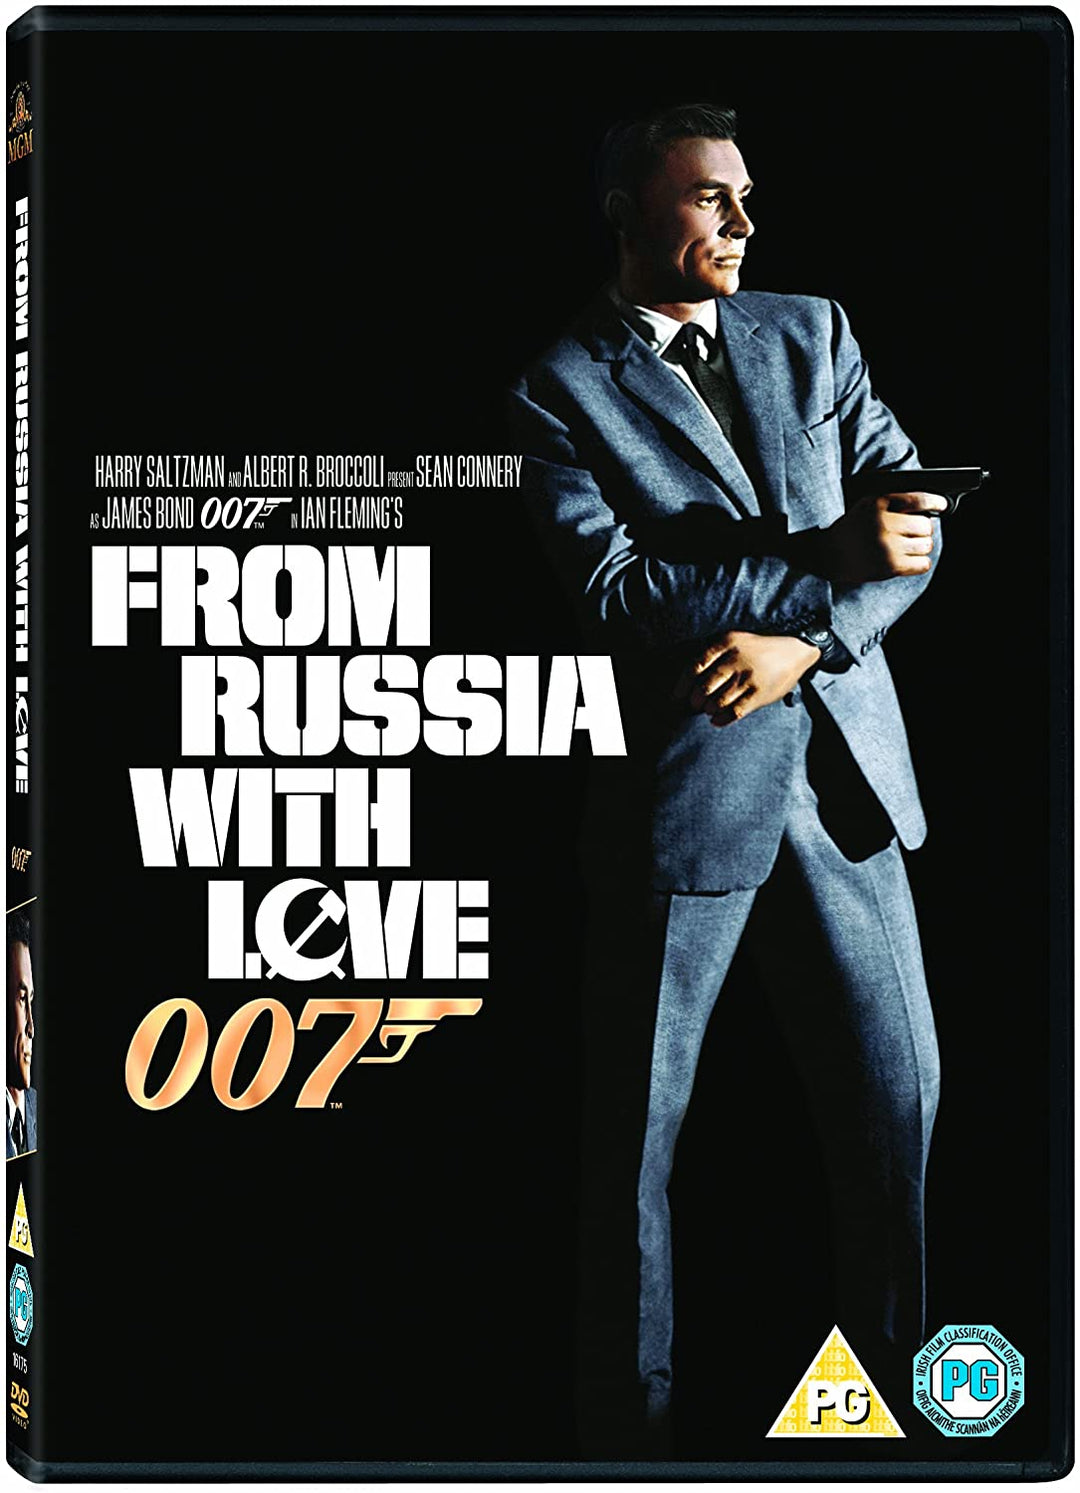 From Russia with Love [1963] - Action/Adventure [DVD]